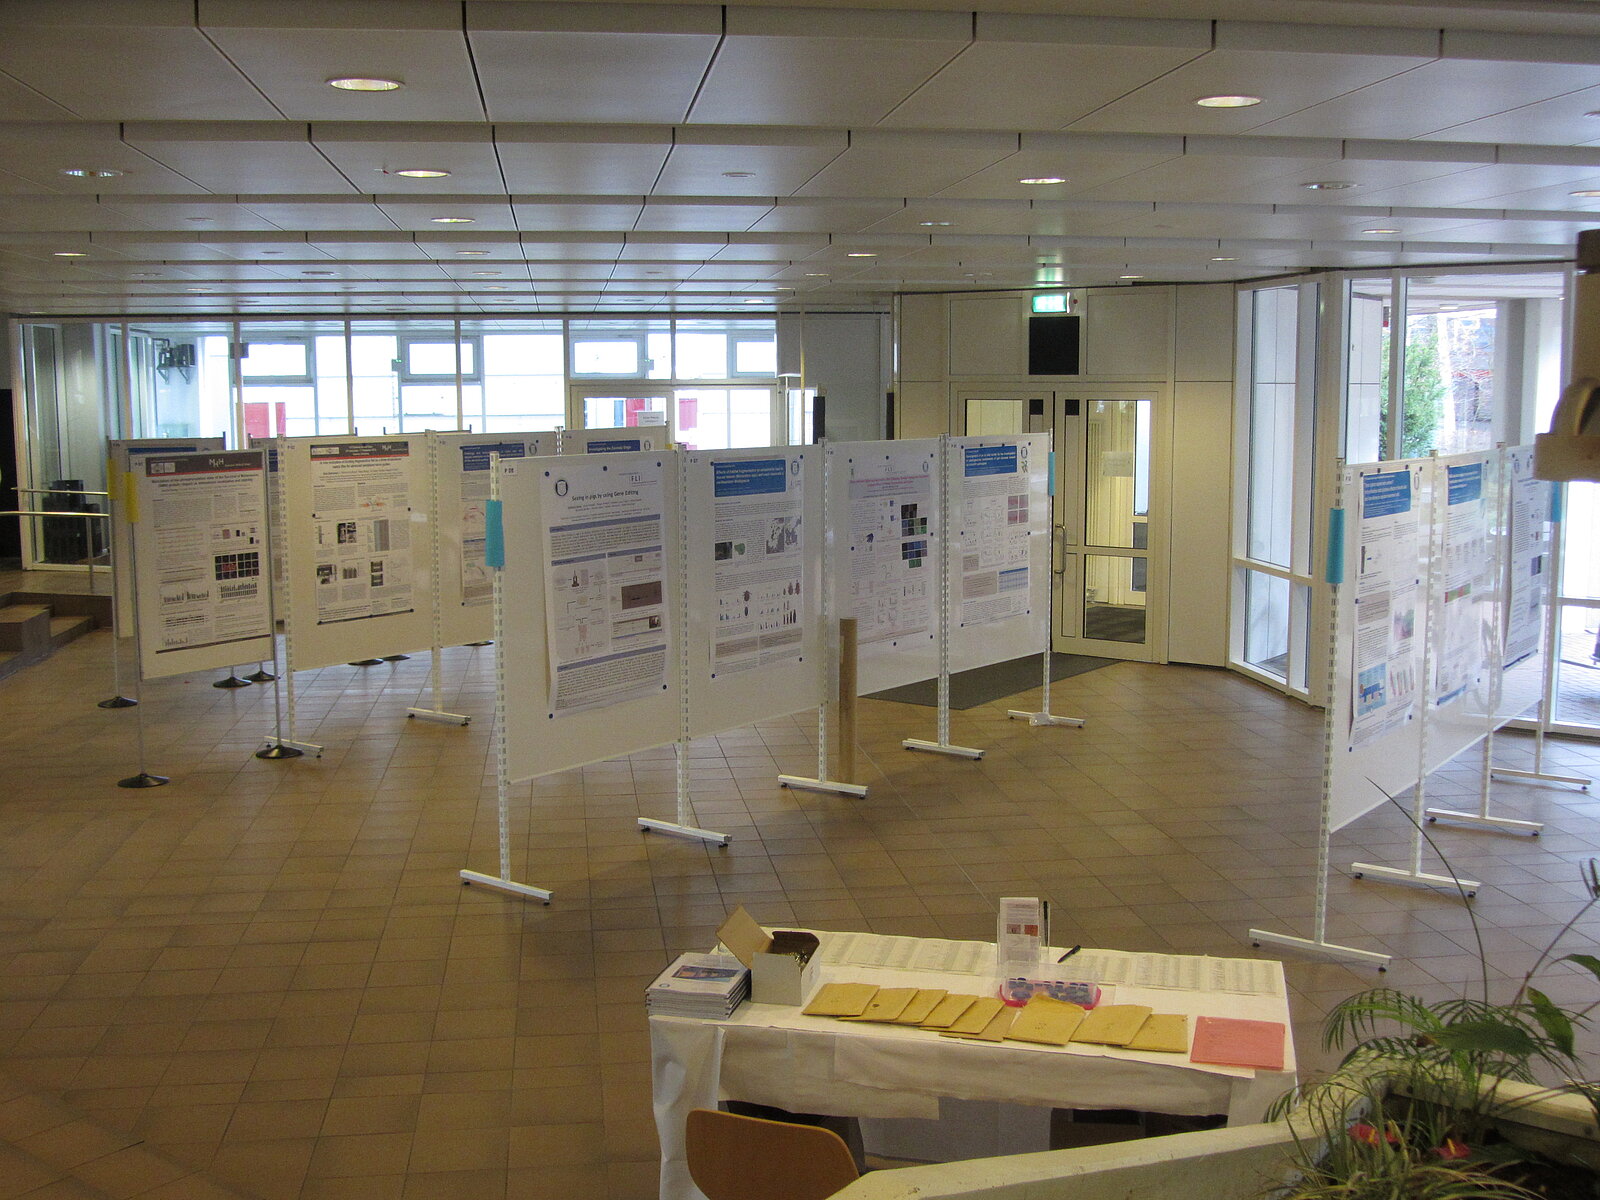 Poster session GS Day